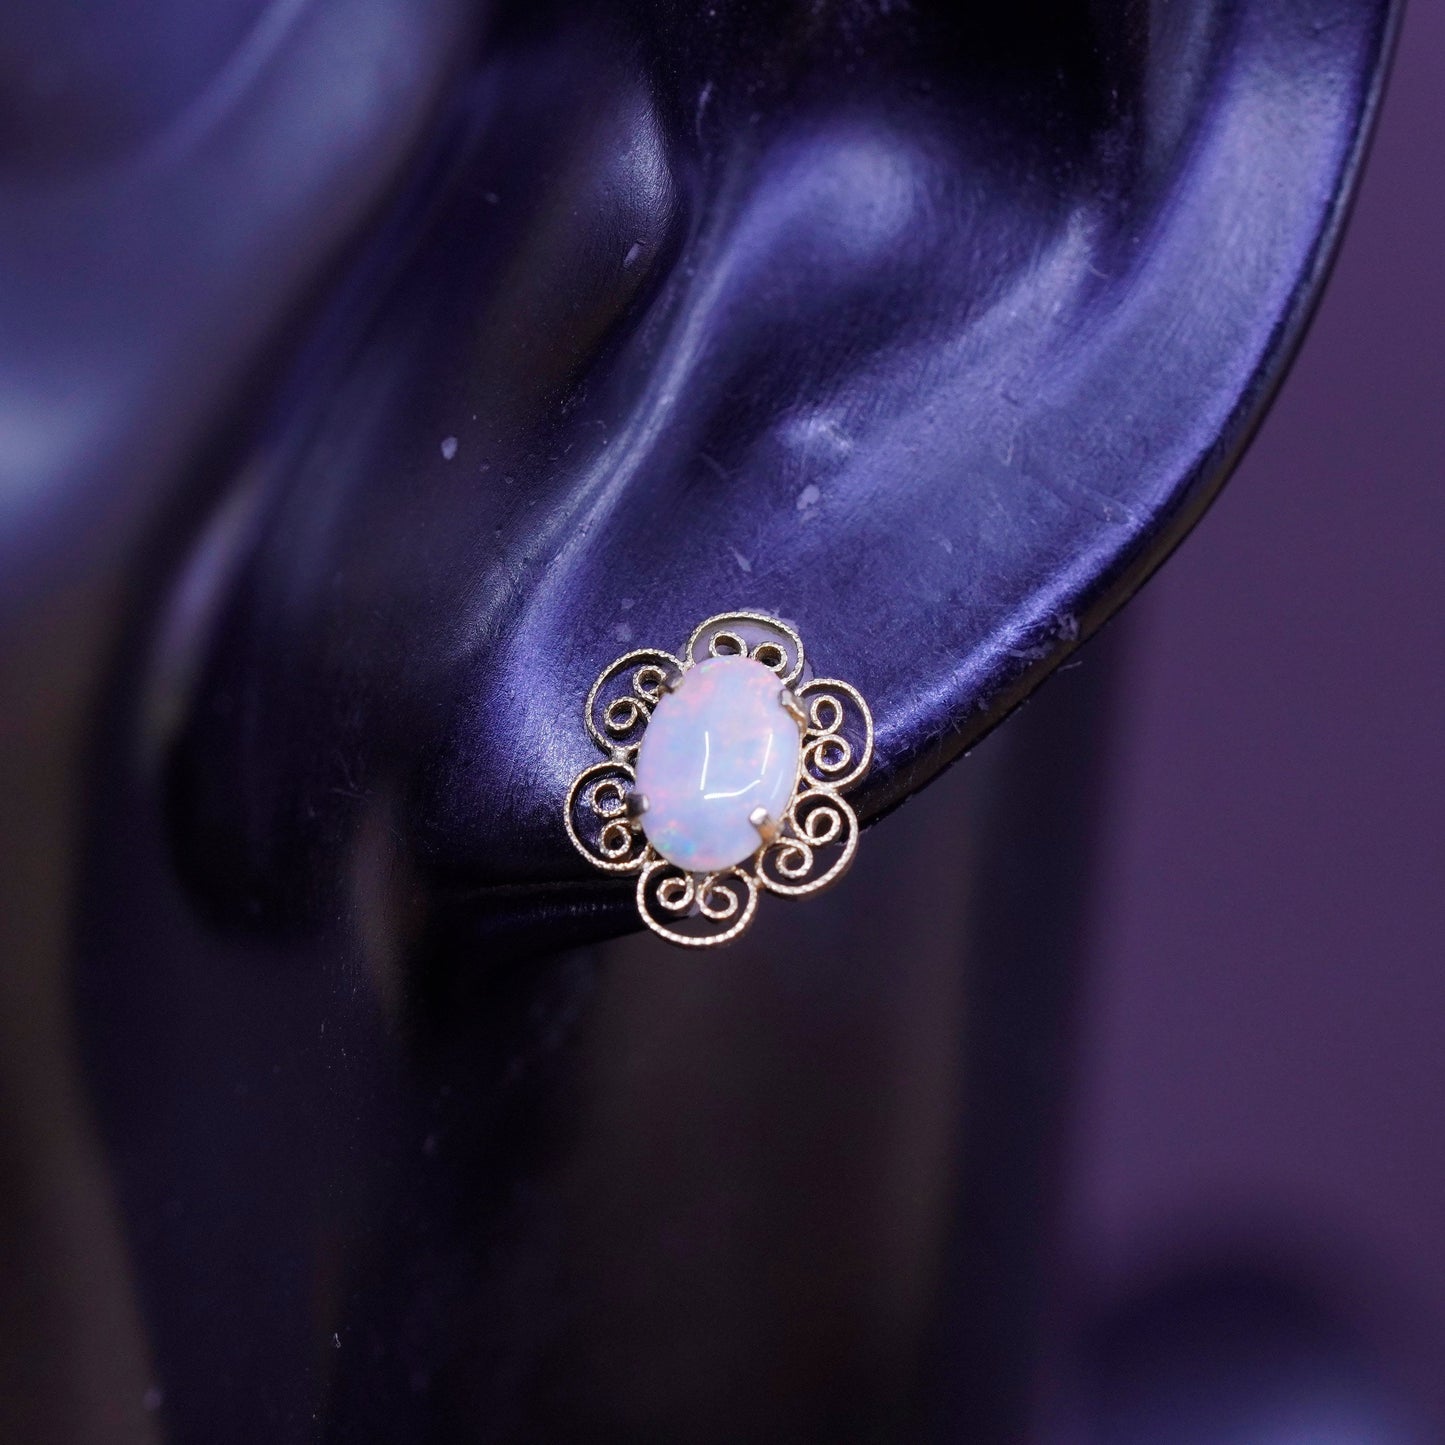 1g, filigree 14K yellow gold studs earrings with opal inlay